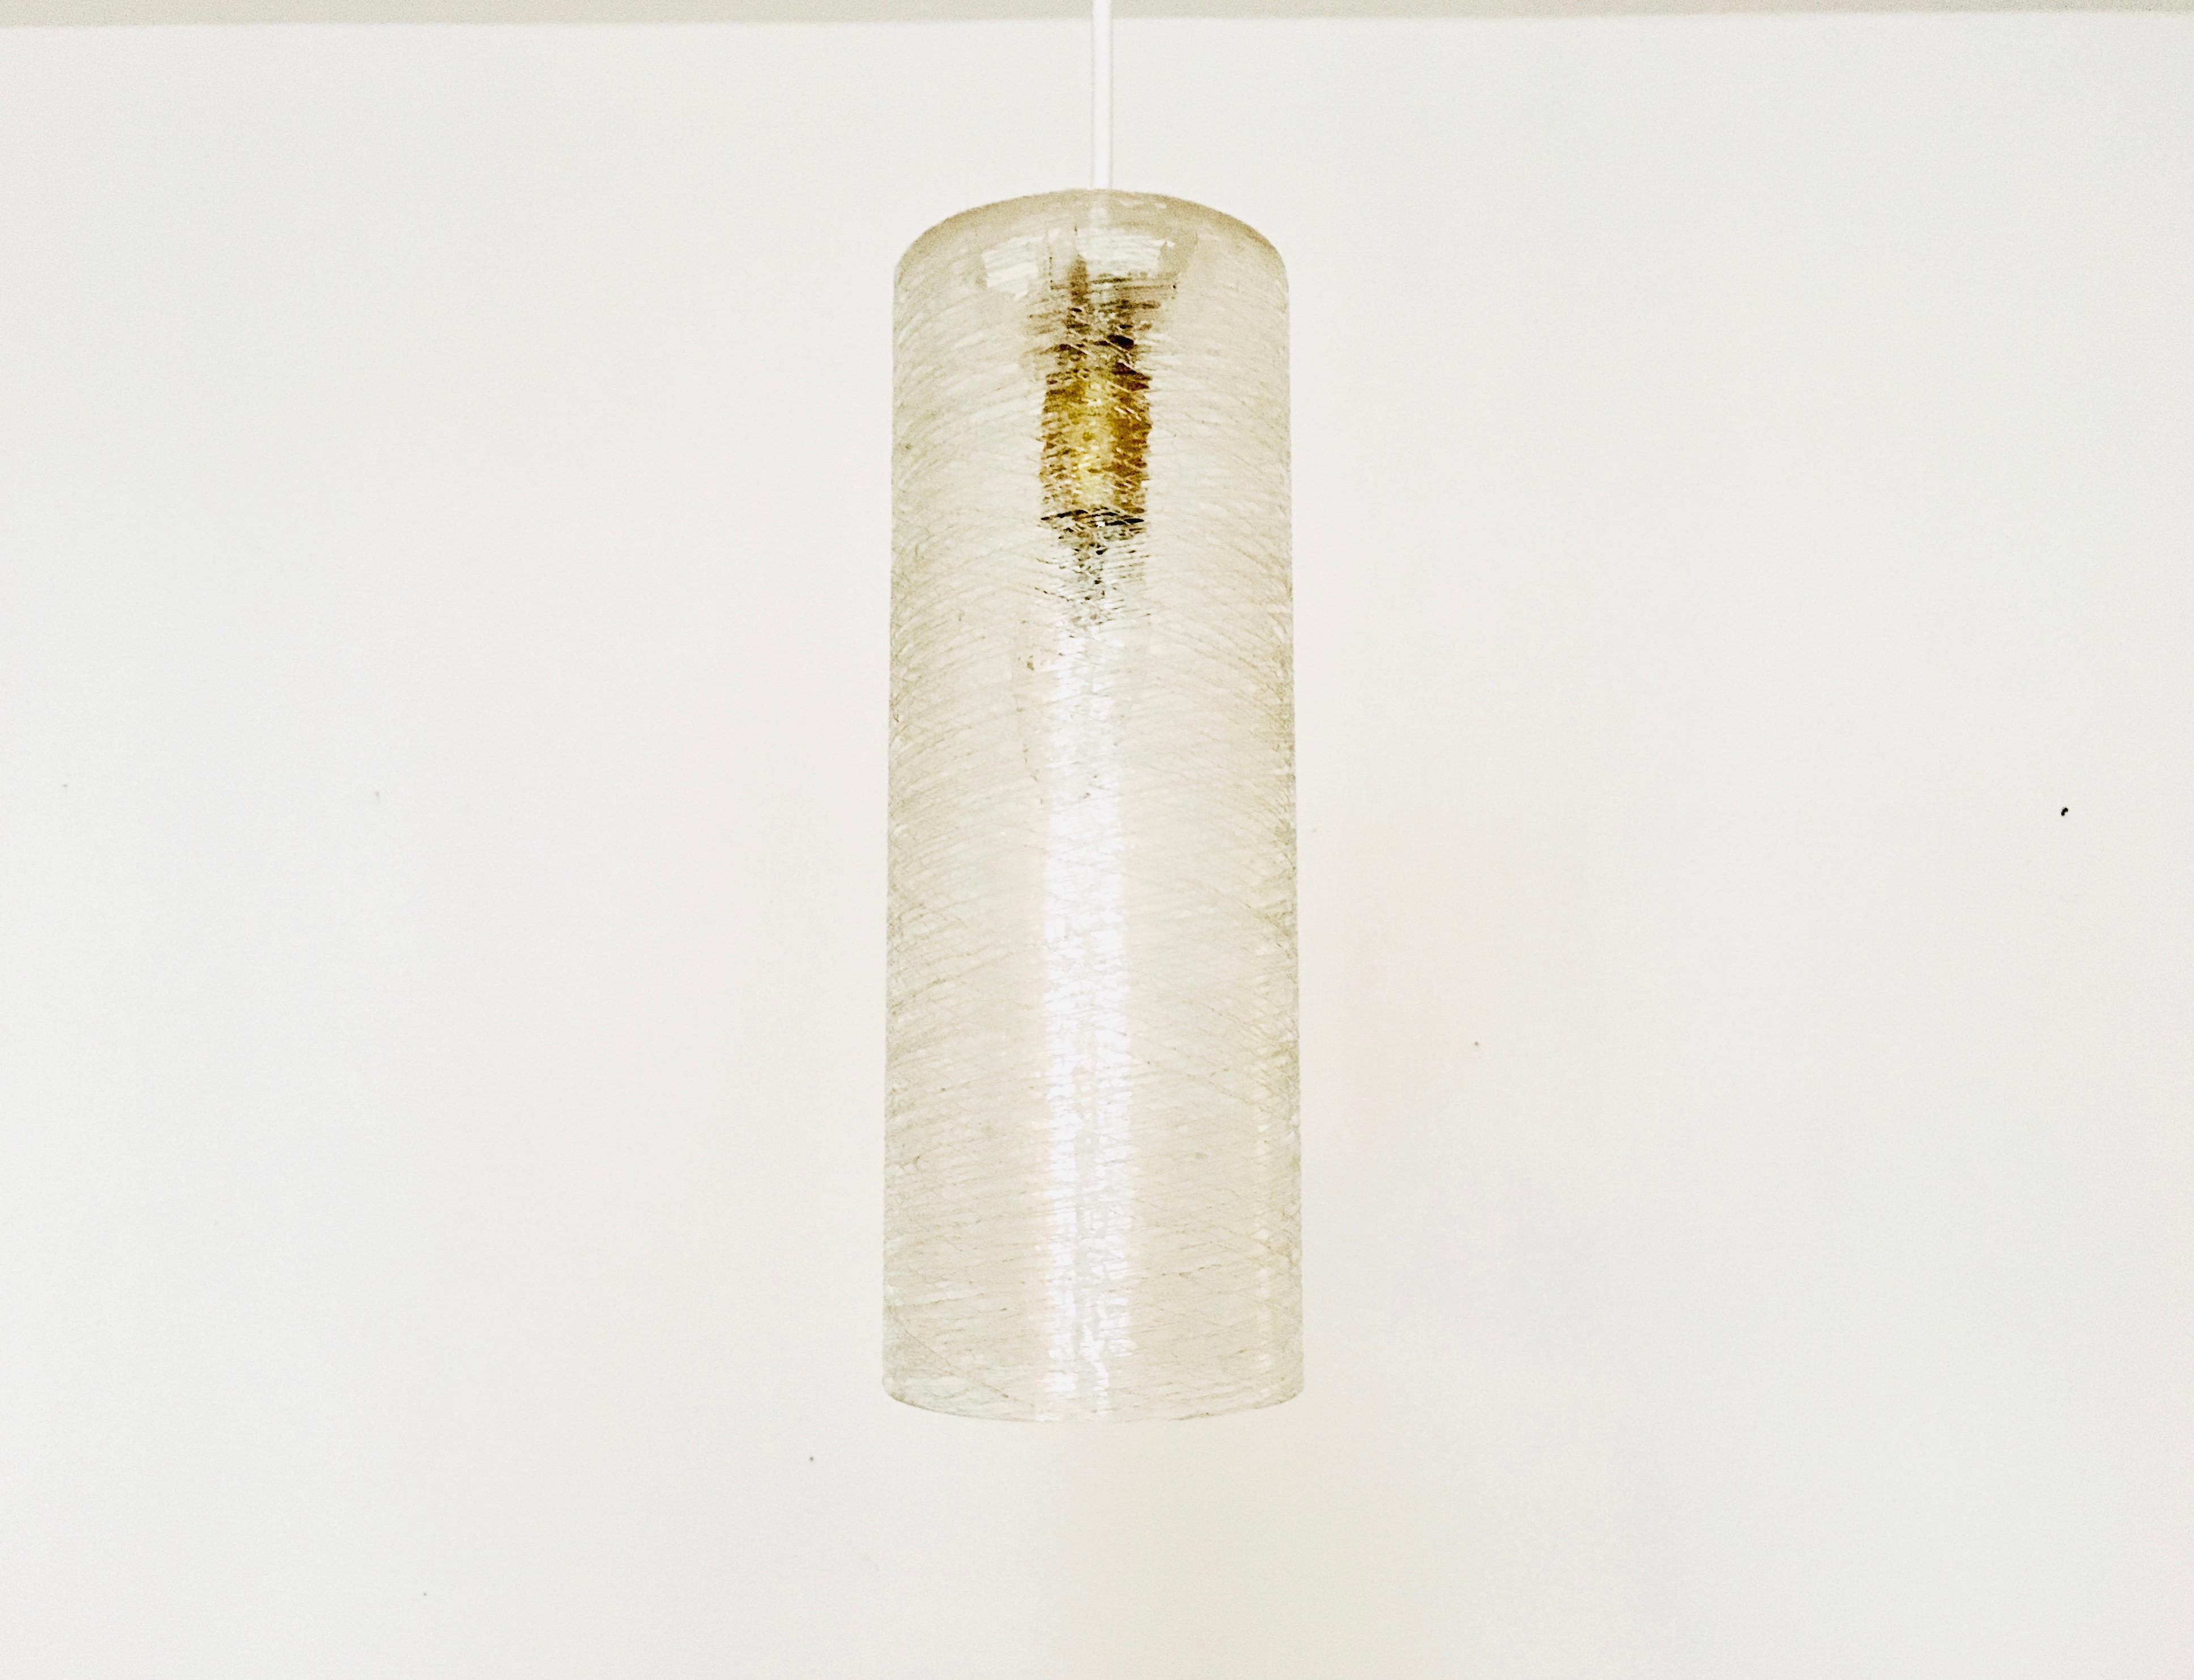 Extremely beautiful crystal glass pendant lamps from the 1950s.
The lamp impresses with its design and the particularly beautiful glittering light that it spreads.
Wonderful workmanship.

Manufacturer: Doria

Condition:

Very good vintage